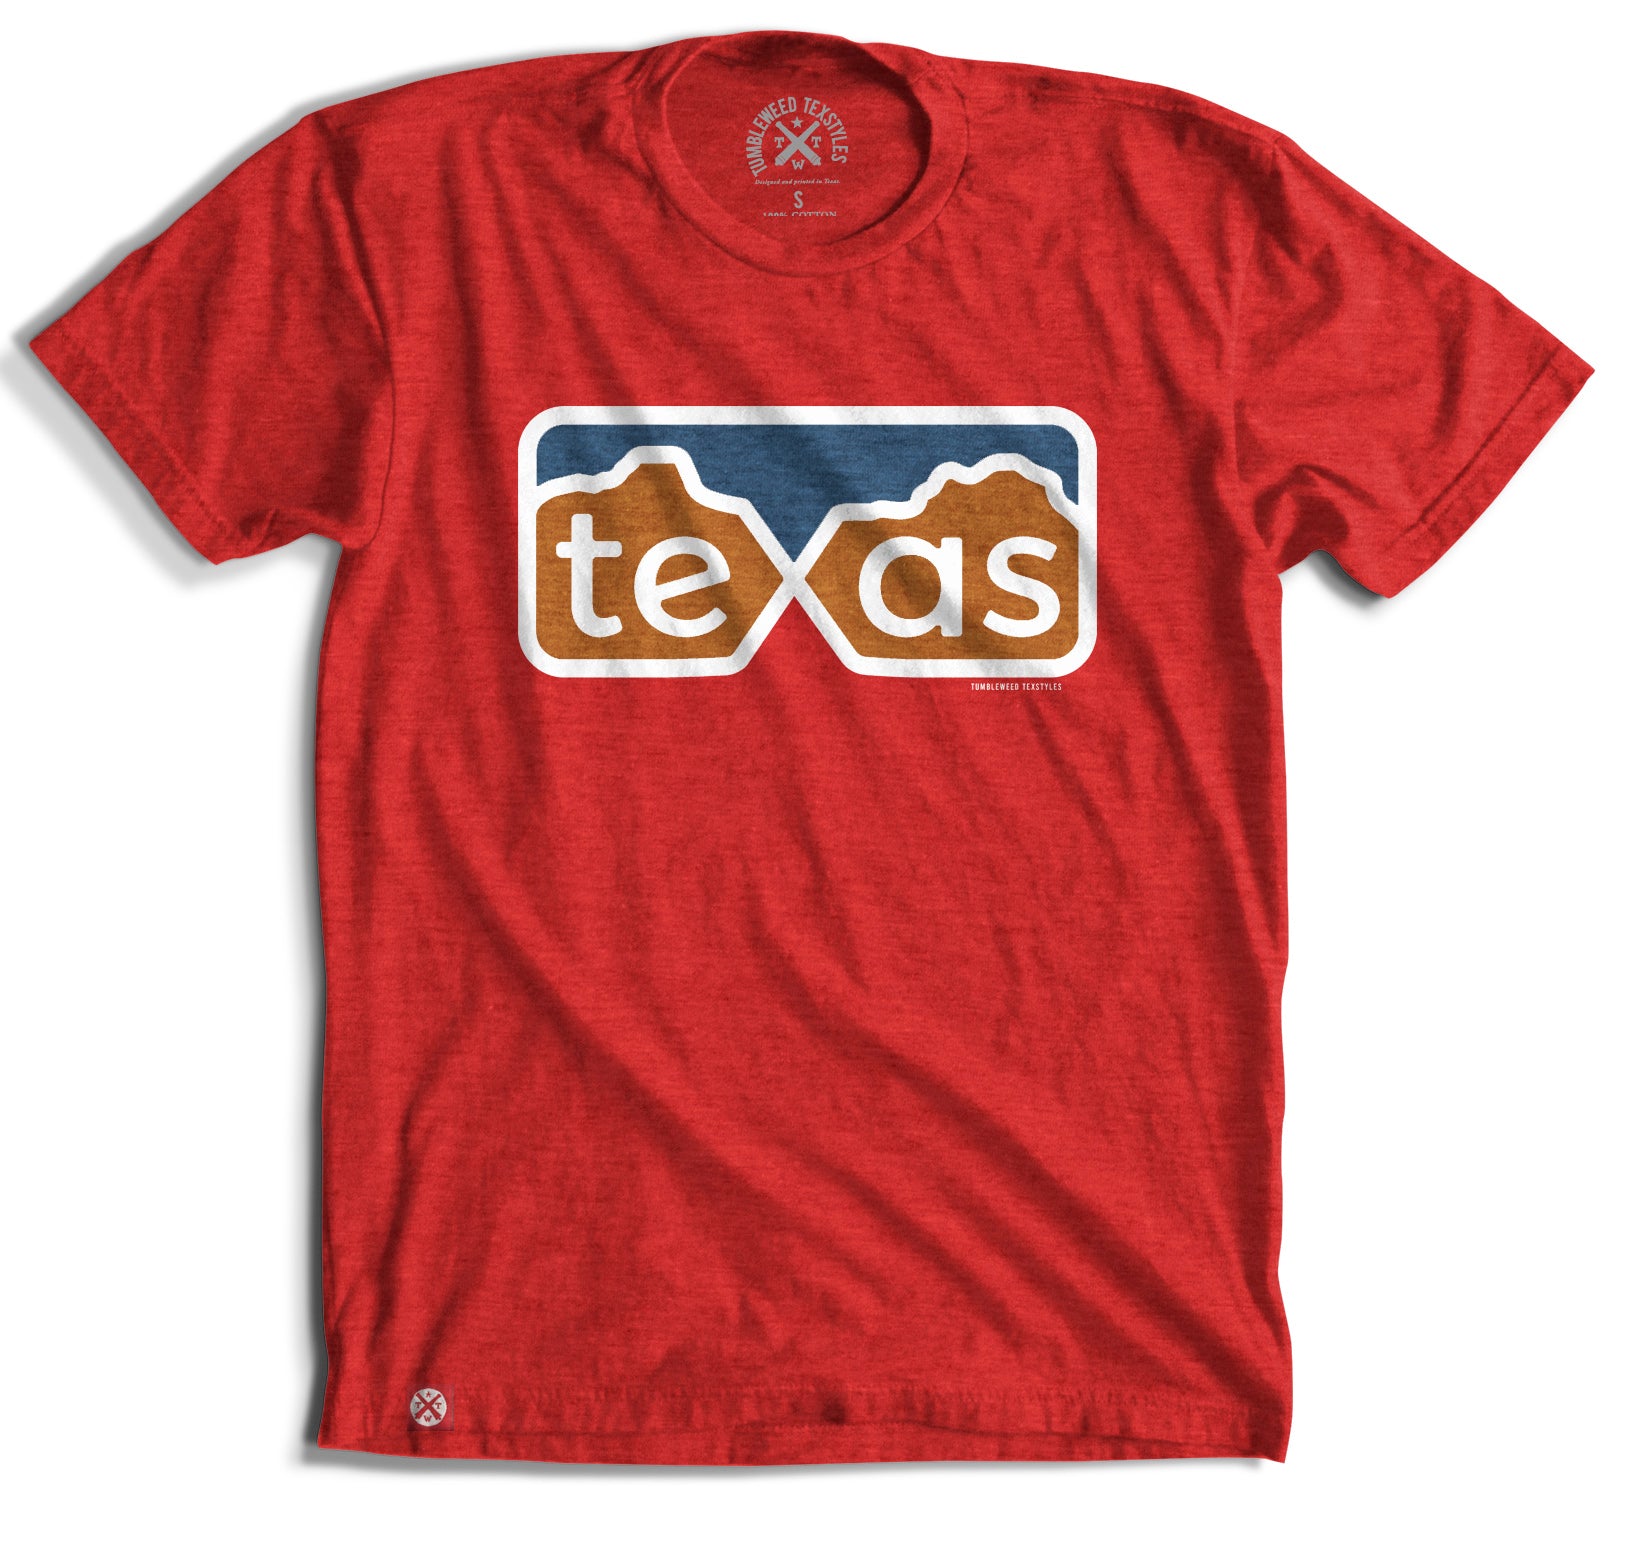 Texas Apparel & Shirts | by Tumbleweed TexStyles